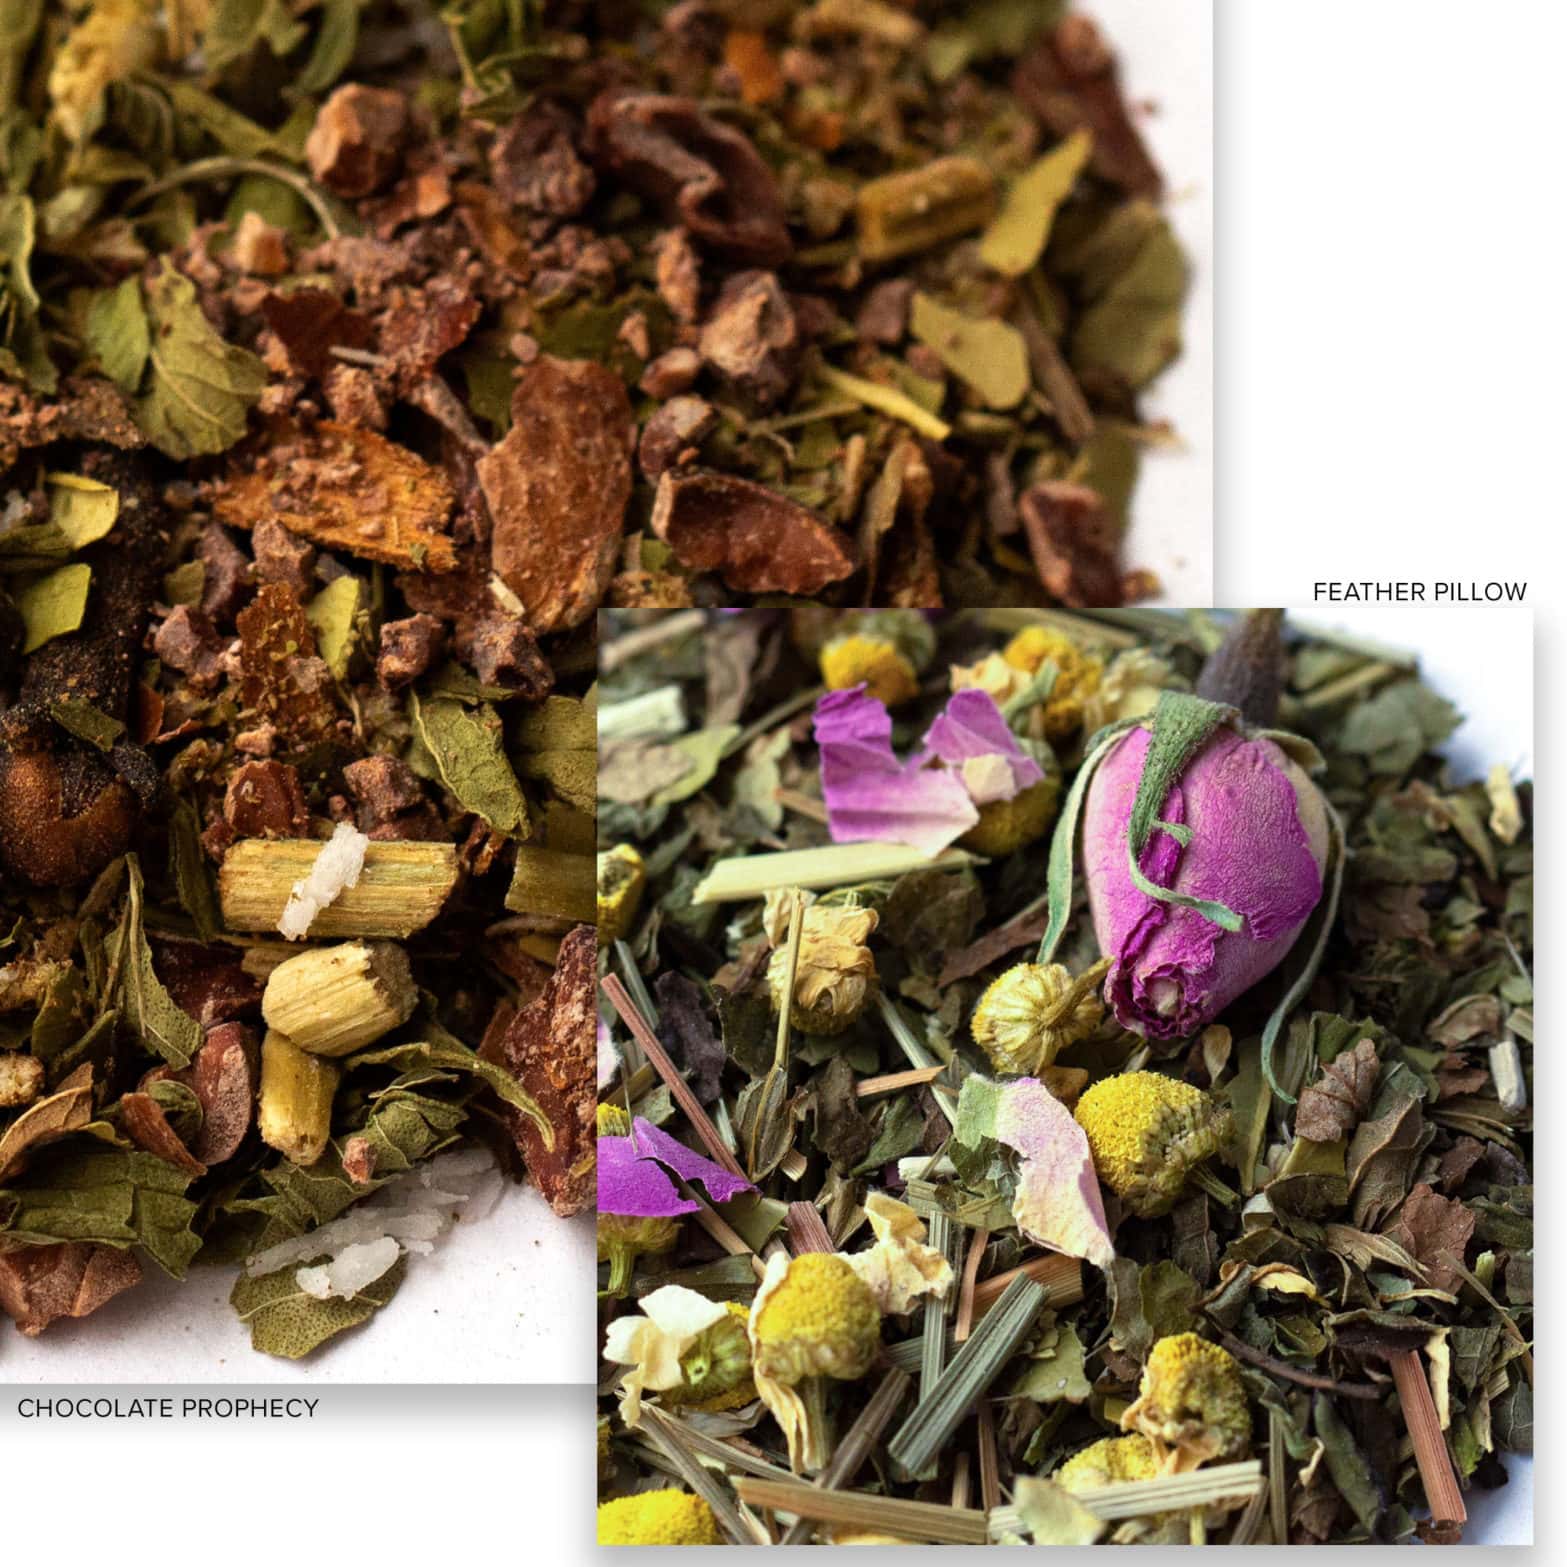 CHOCOLATE PROPHECY AND FEATHER PILLOW YERBA MATE TEA